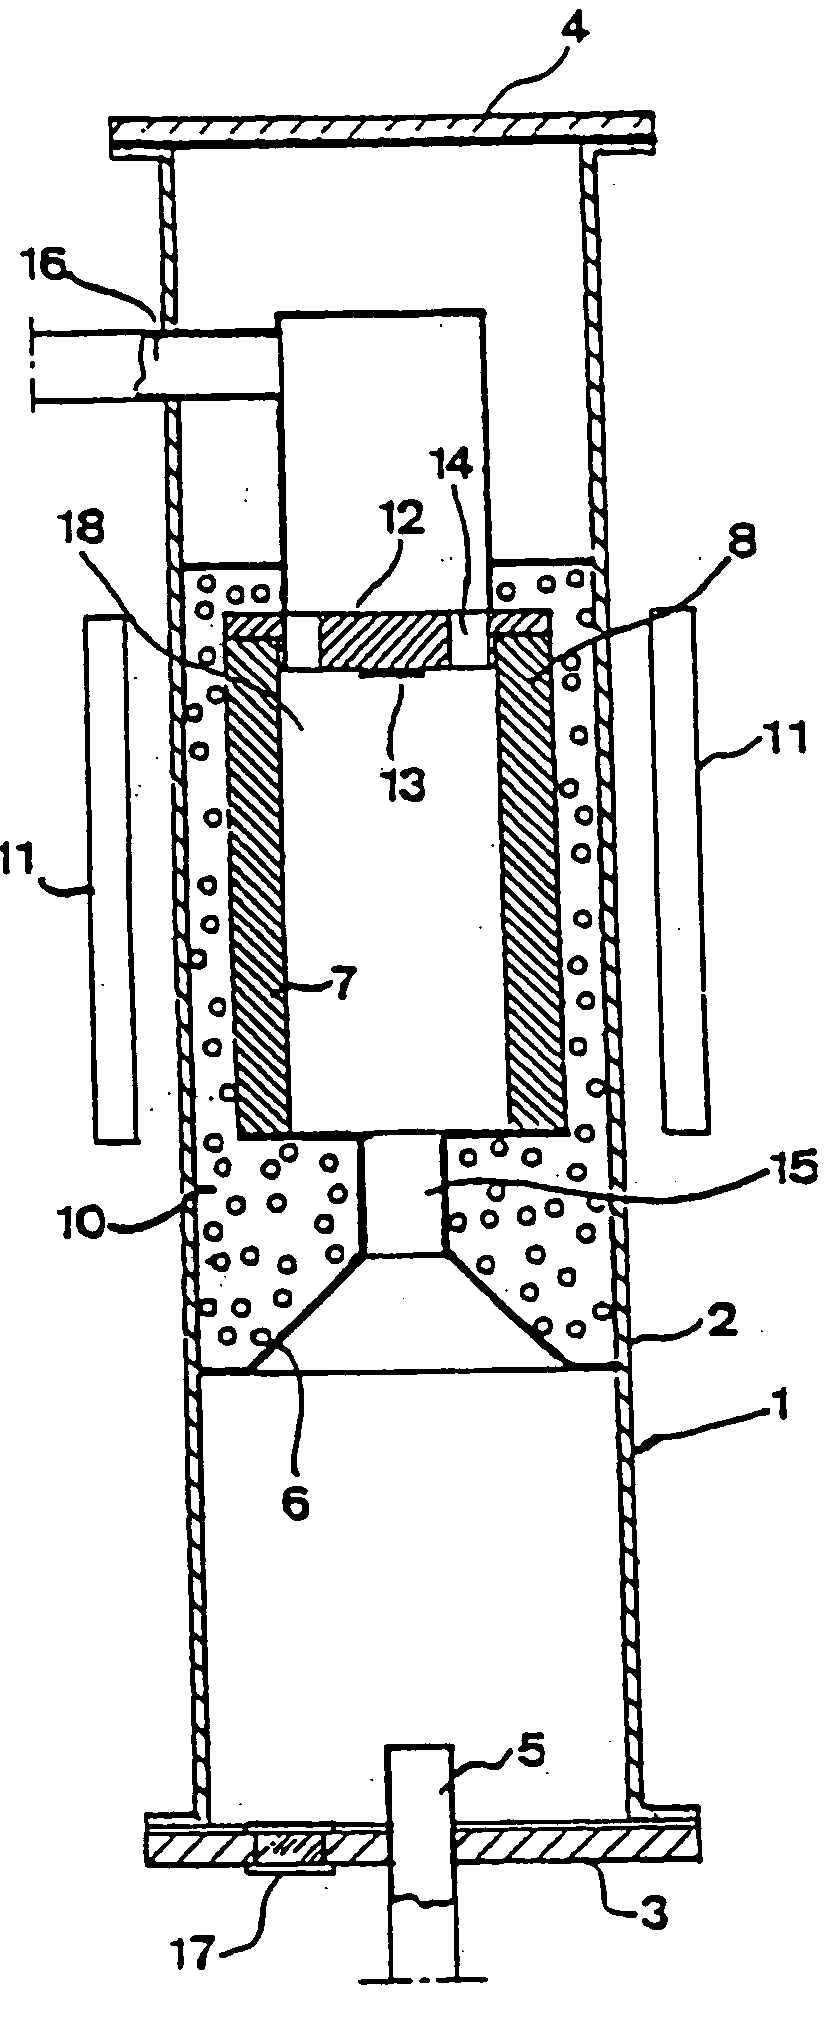 Device and method for producing single crystals by vapor deposition